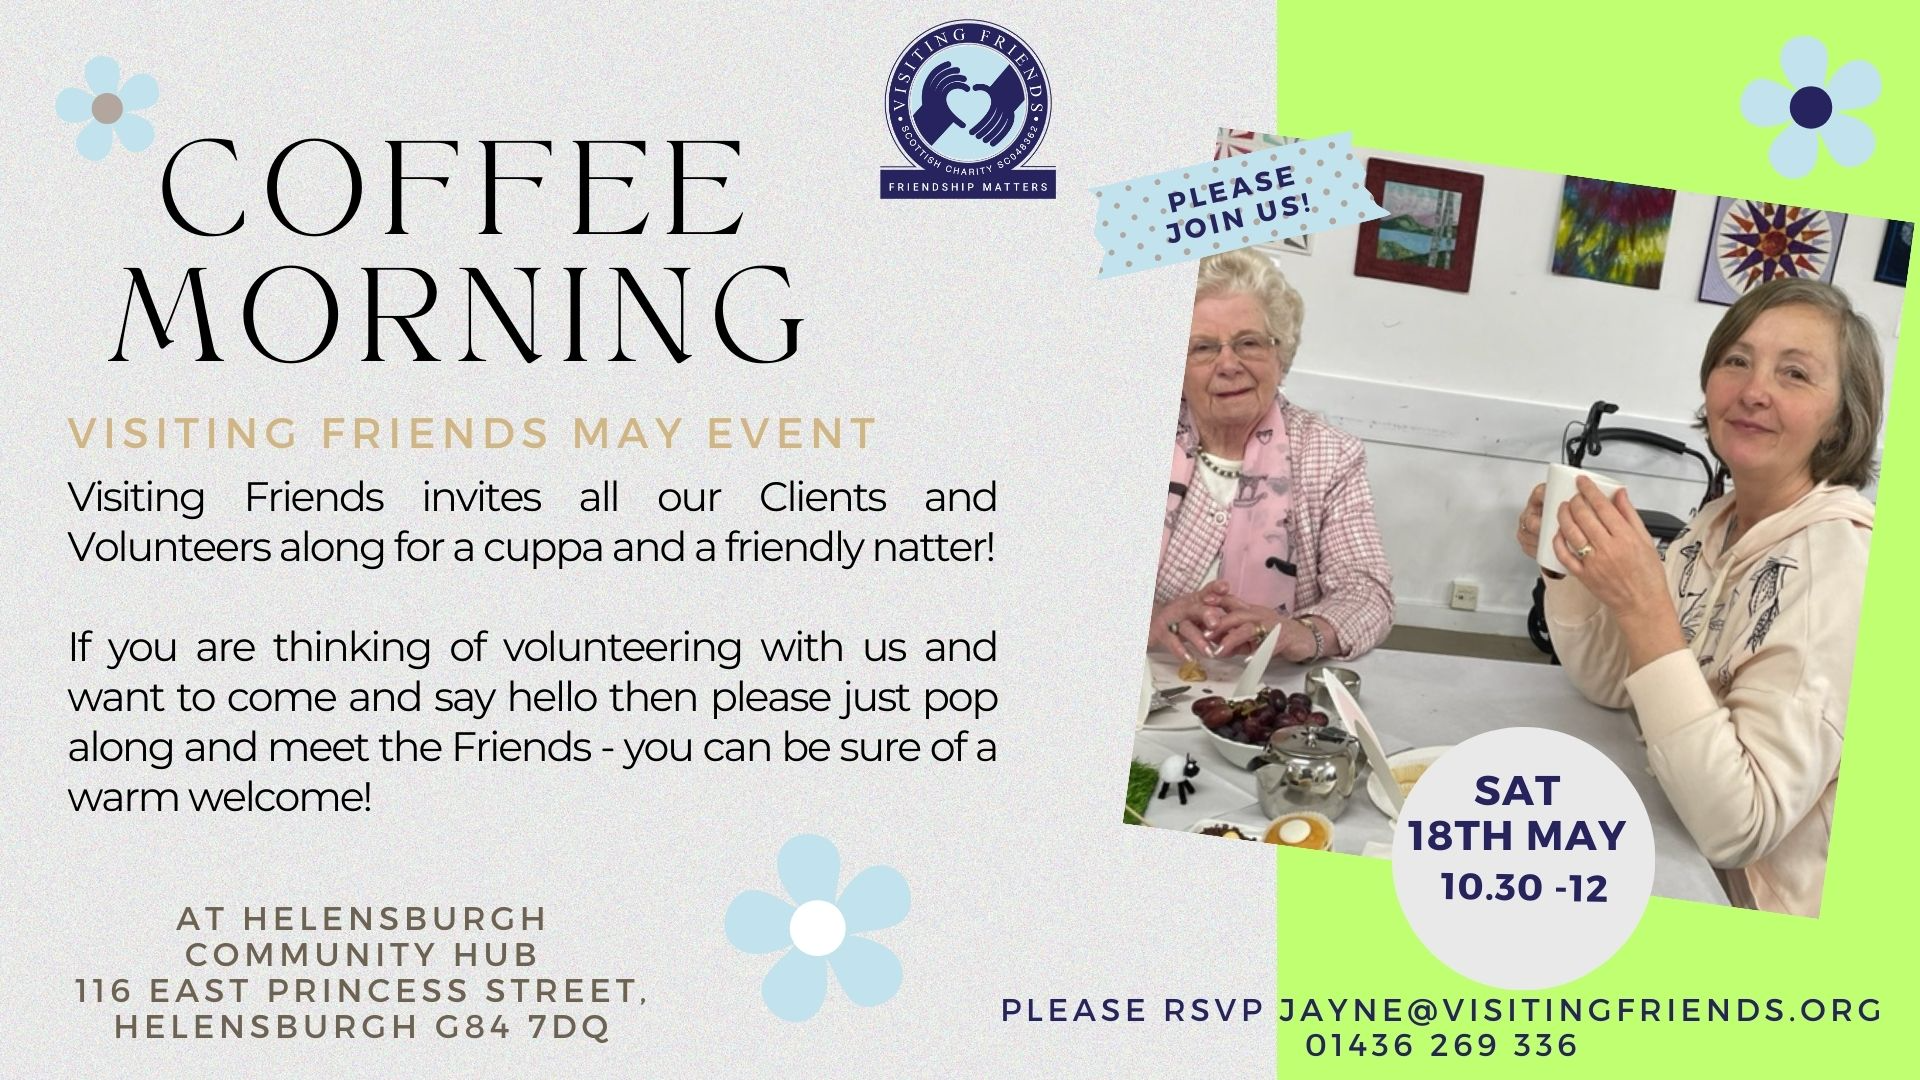 Visiting Friends Coffee Morning - Sat 18th May from 10.30am-12pm